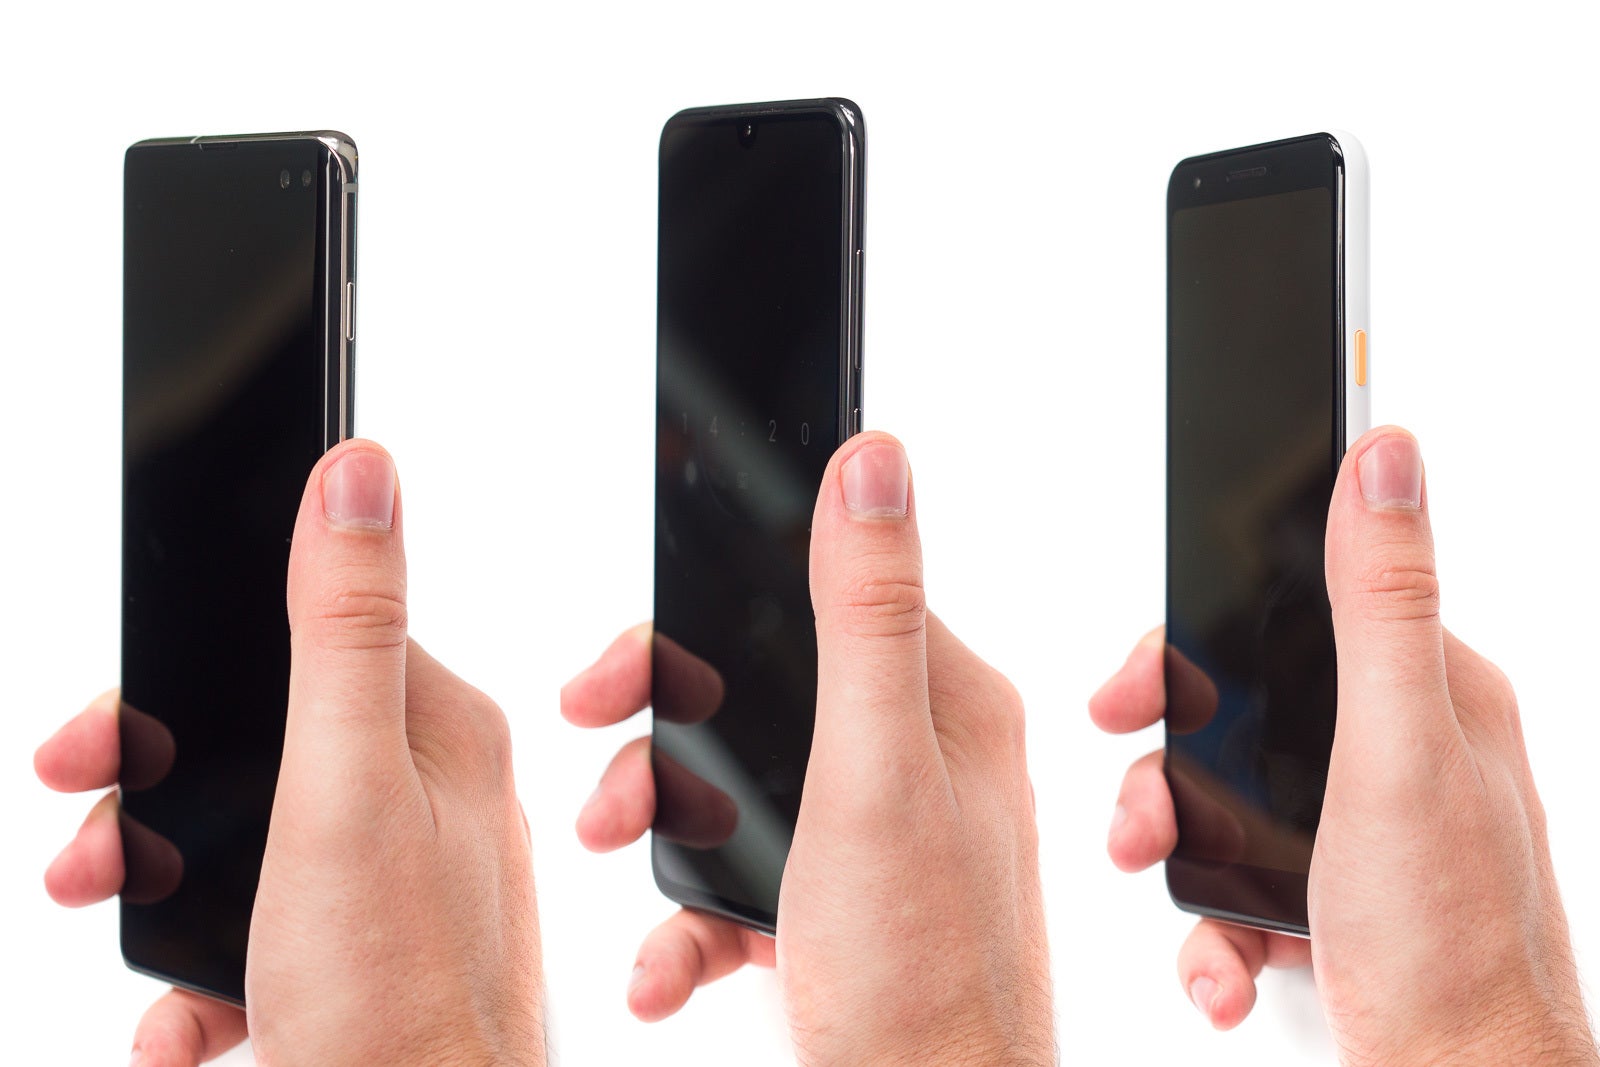 Position similar to the one in the middle is the way to go! - Why do phone makers let these design mistakes happen?